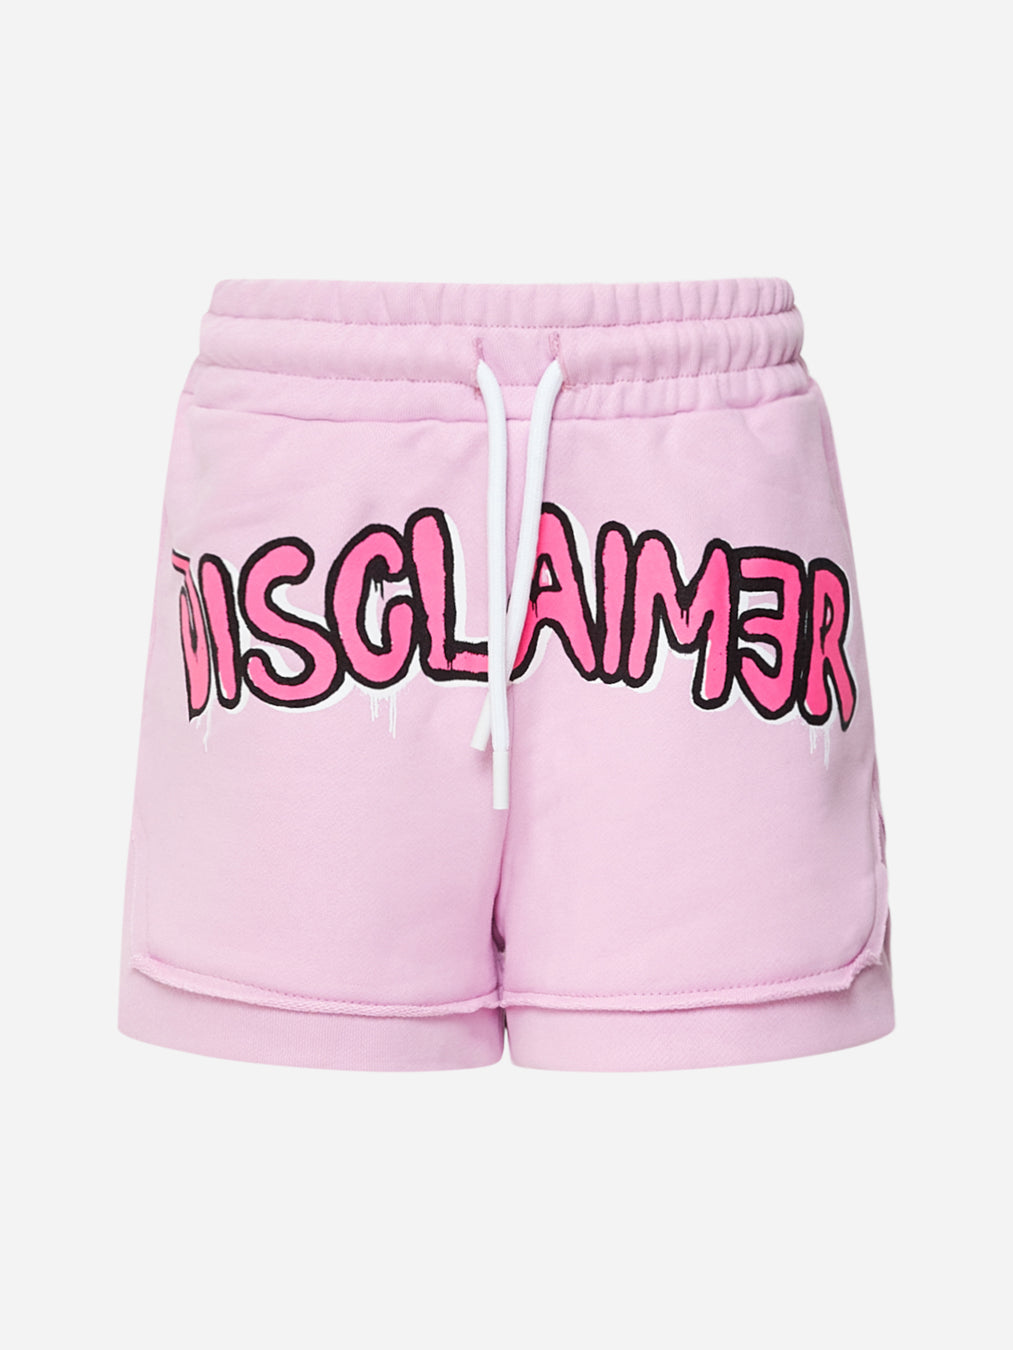 Disclaimer shorts kids rosa con logo writer frontale in contrasto